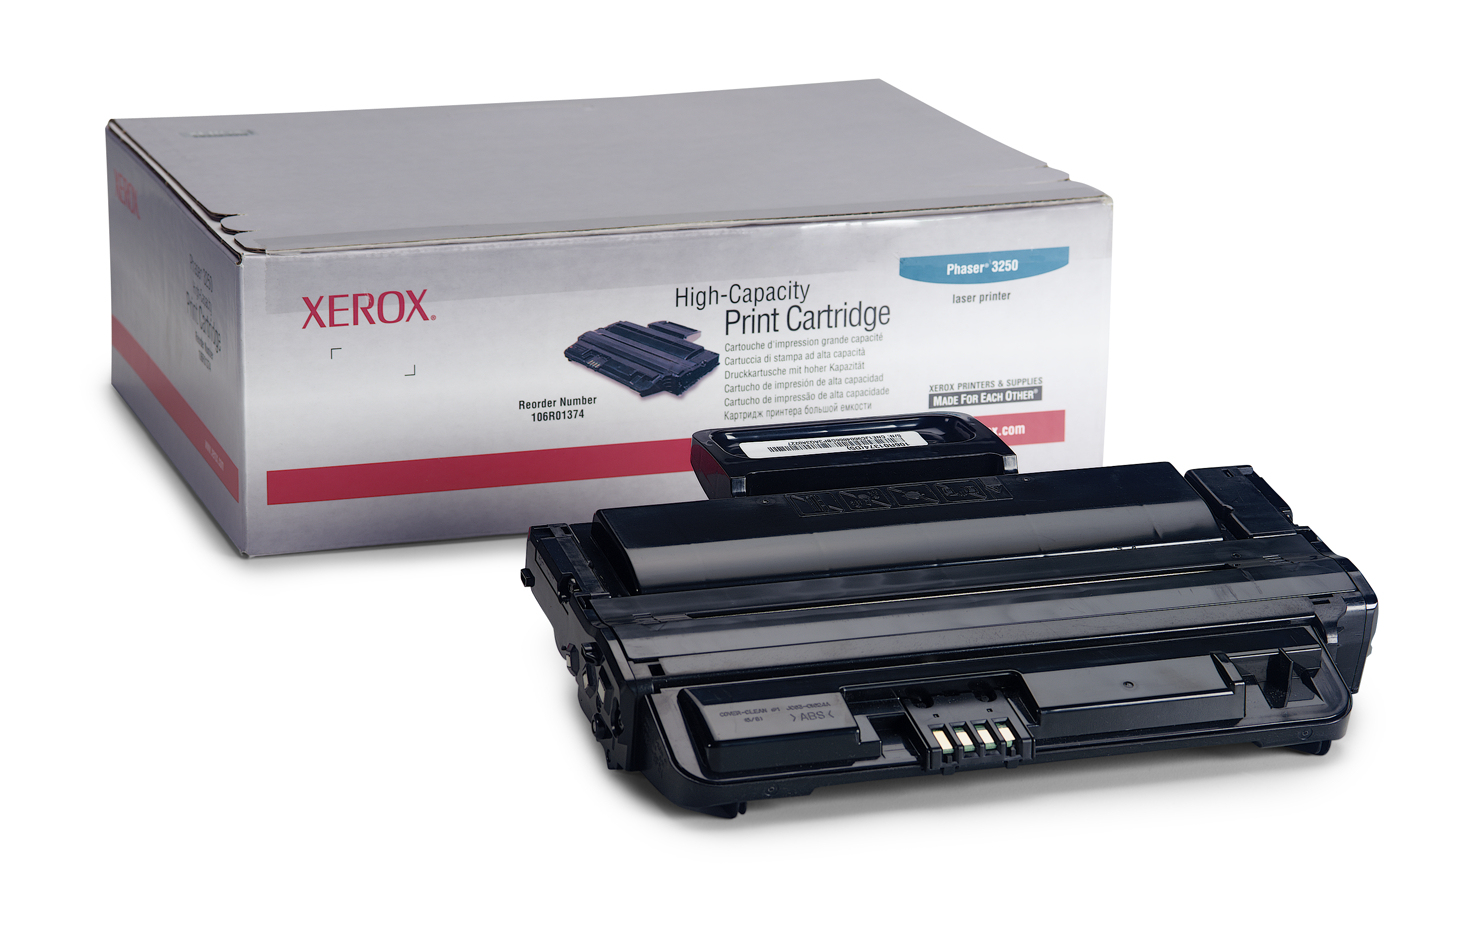 Xerox 106R01374 Toner cartridge black, 5K pages ISO/IEC 19752 for Xerox Phaser 3250